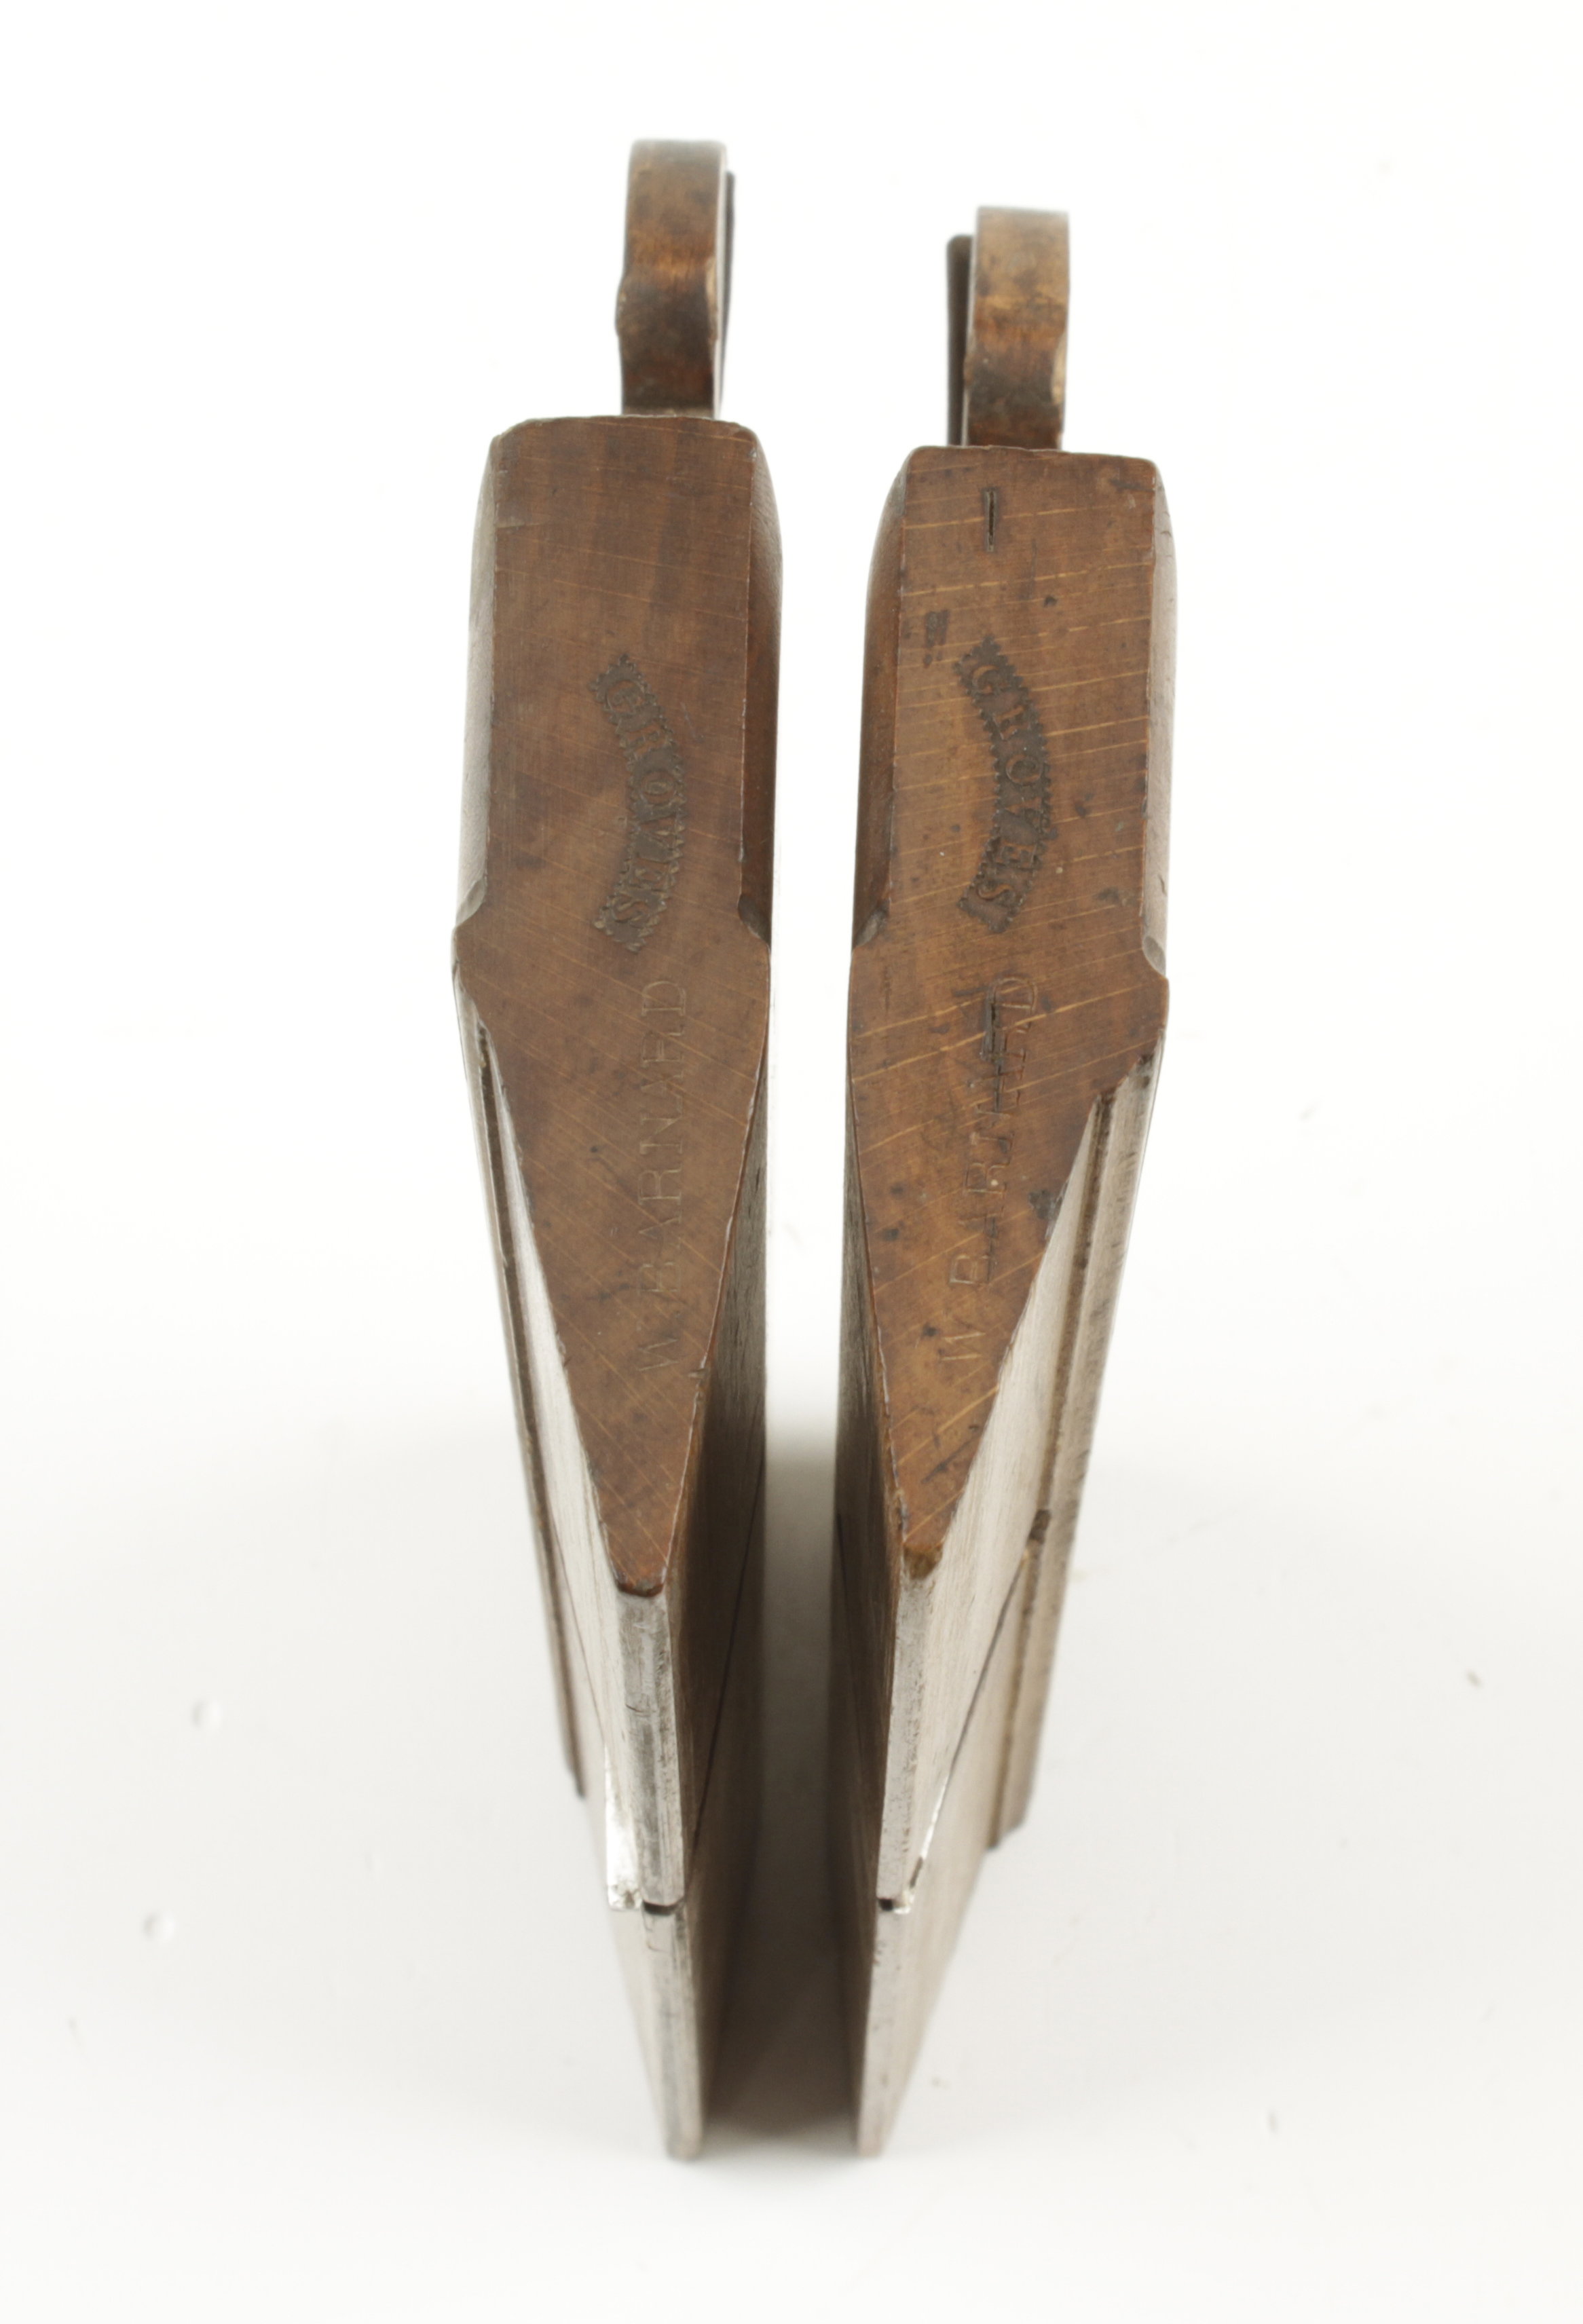 A pair of side rebate planes by GROVES G+ - Image 2 of 2